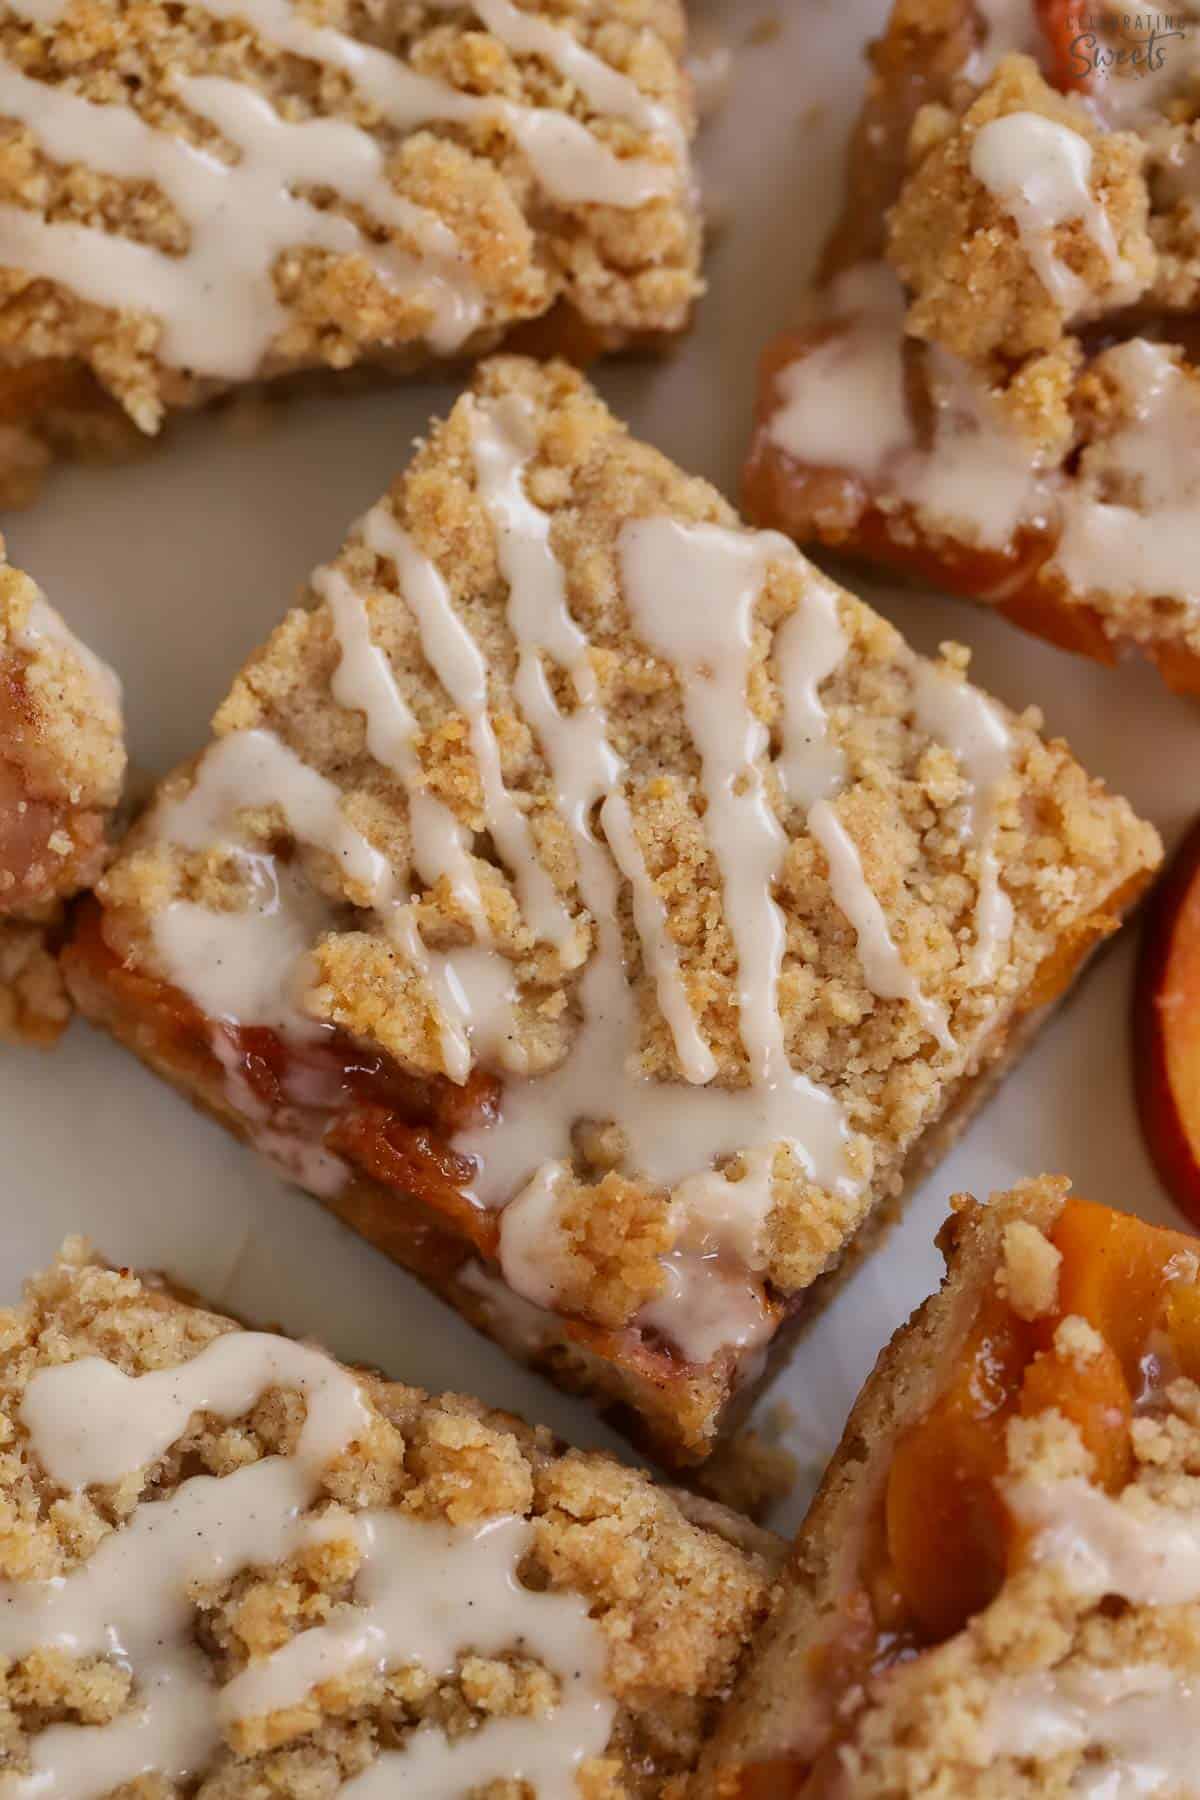 Peach bar topped with crumb topping and white icing on a piece of parchment paper.